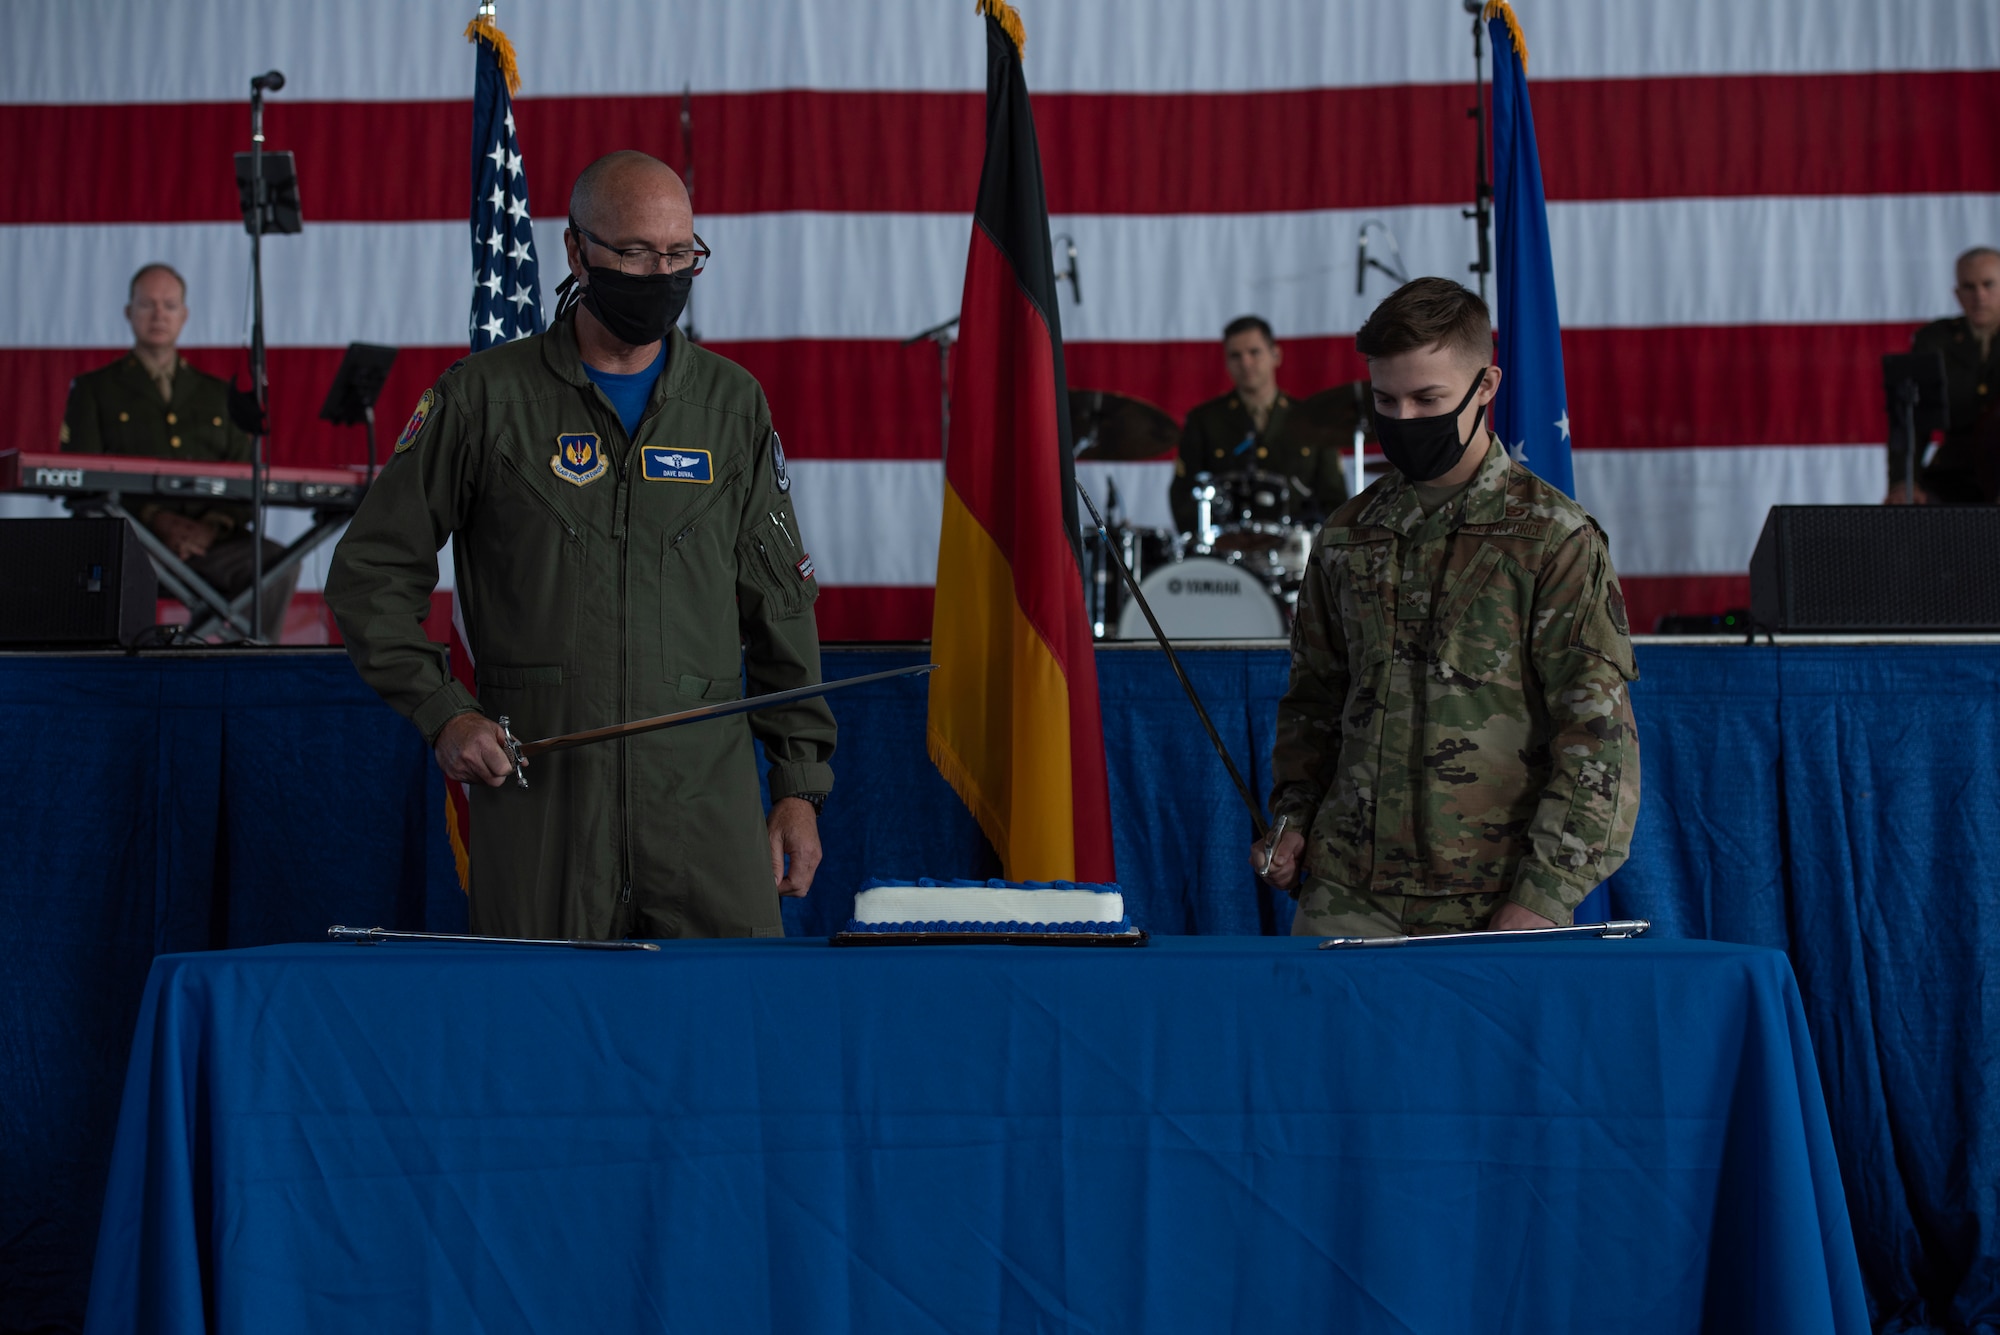 U.S. Air Force Col. David Duval, United States Air Forces in Europe Aerospace and Operational Medicine chief, and Airman 1st Class Cameron Donk, 24th Intelligence Squadron geospatial analyst, prepare to cut the cake during the 73rd Air Force Birthday Celebration at Ramstein Air Base, Germany, Sept. 18, 2020.